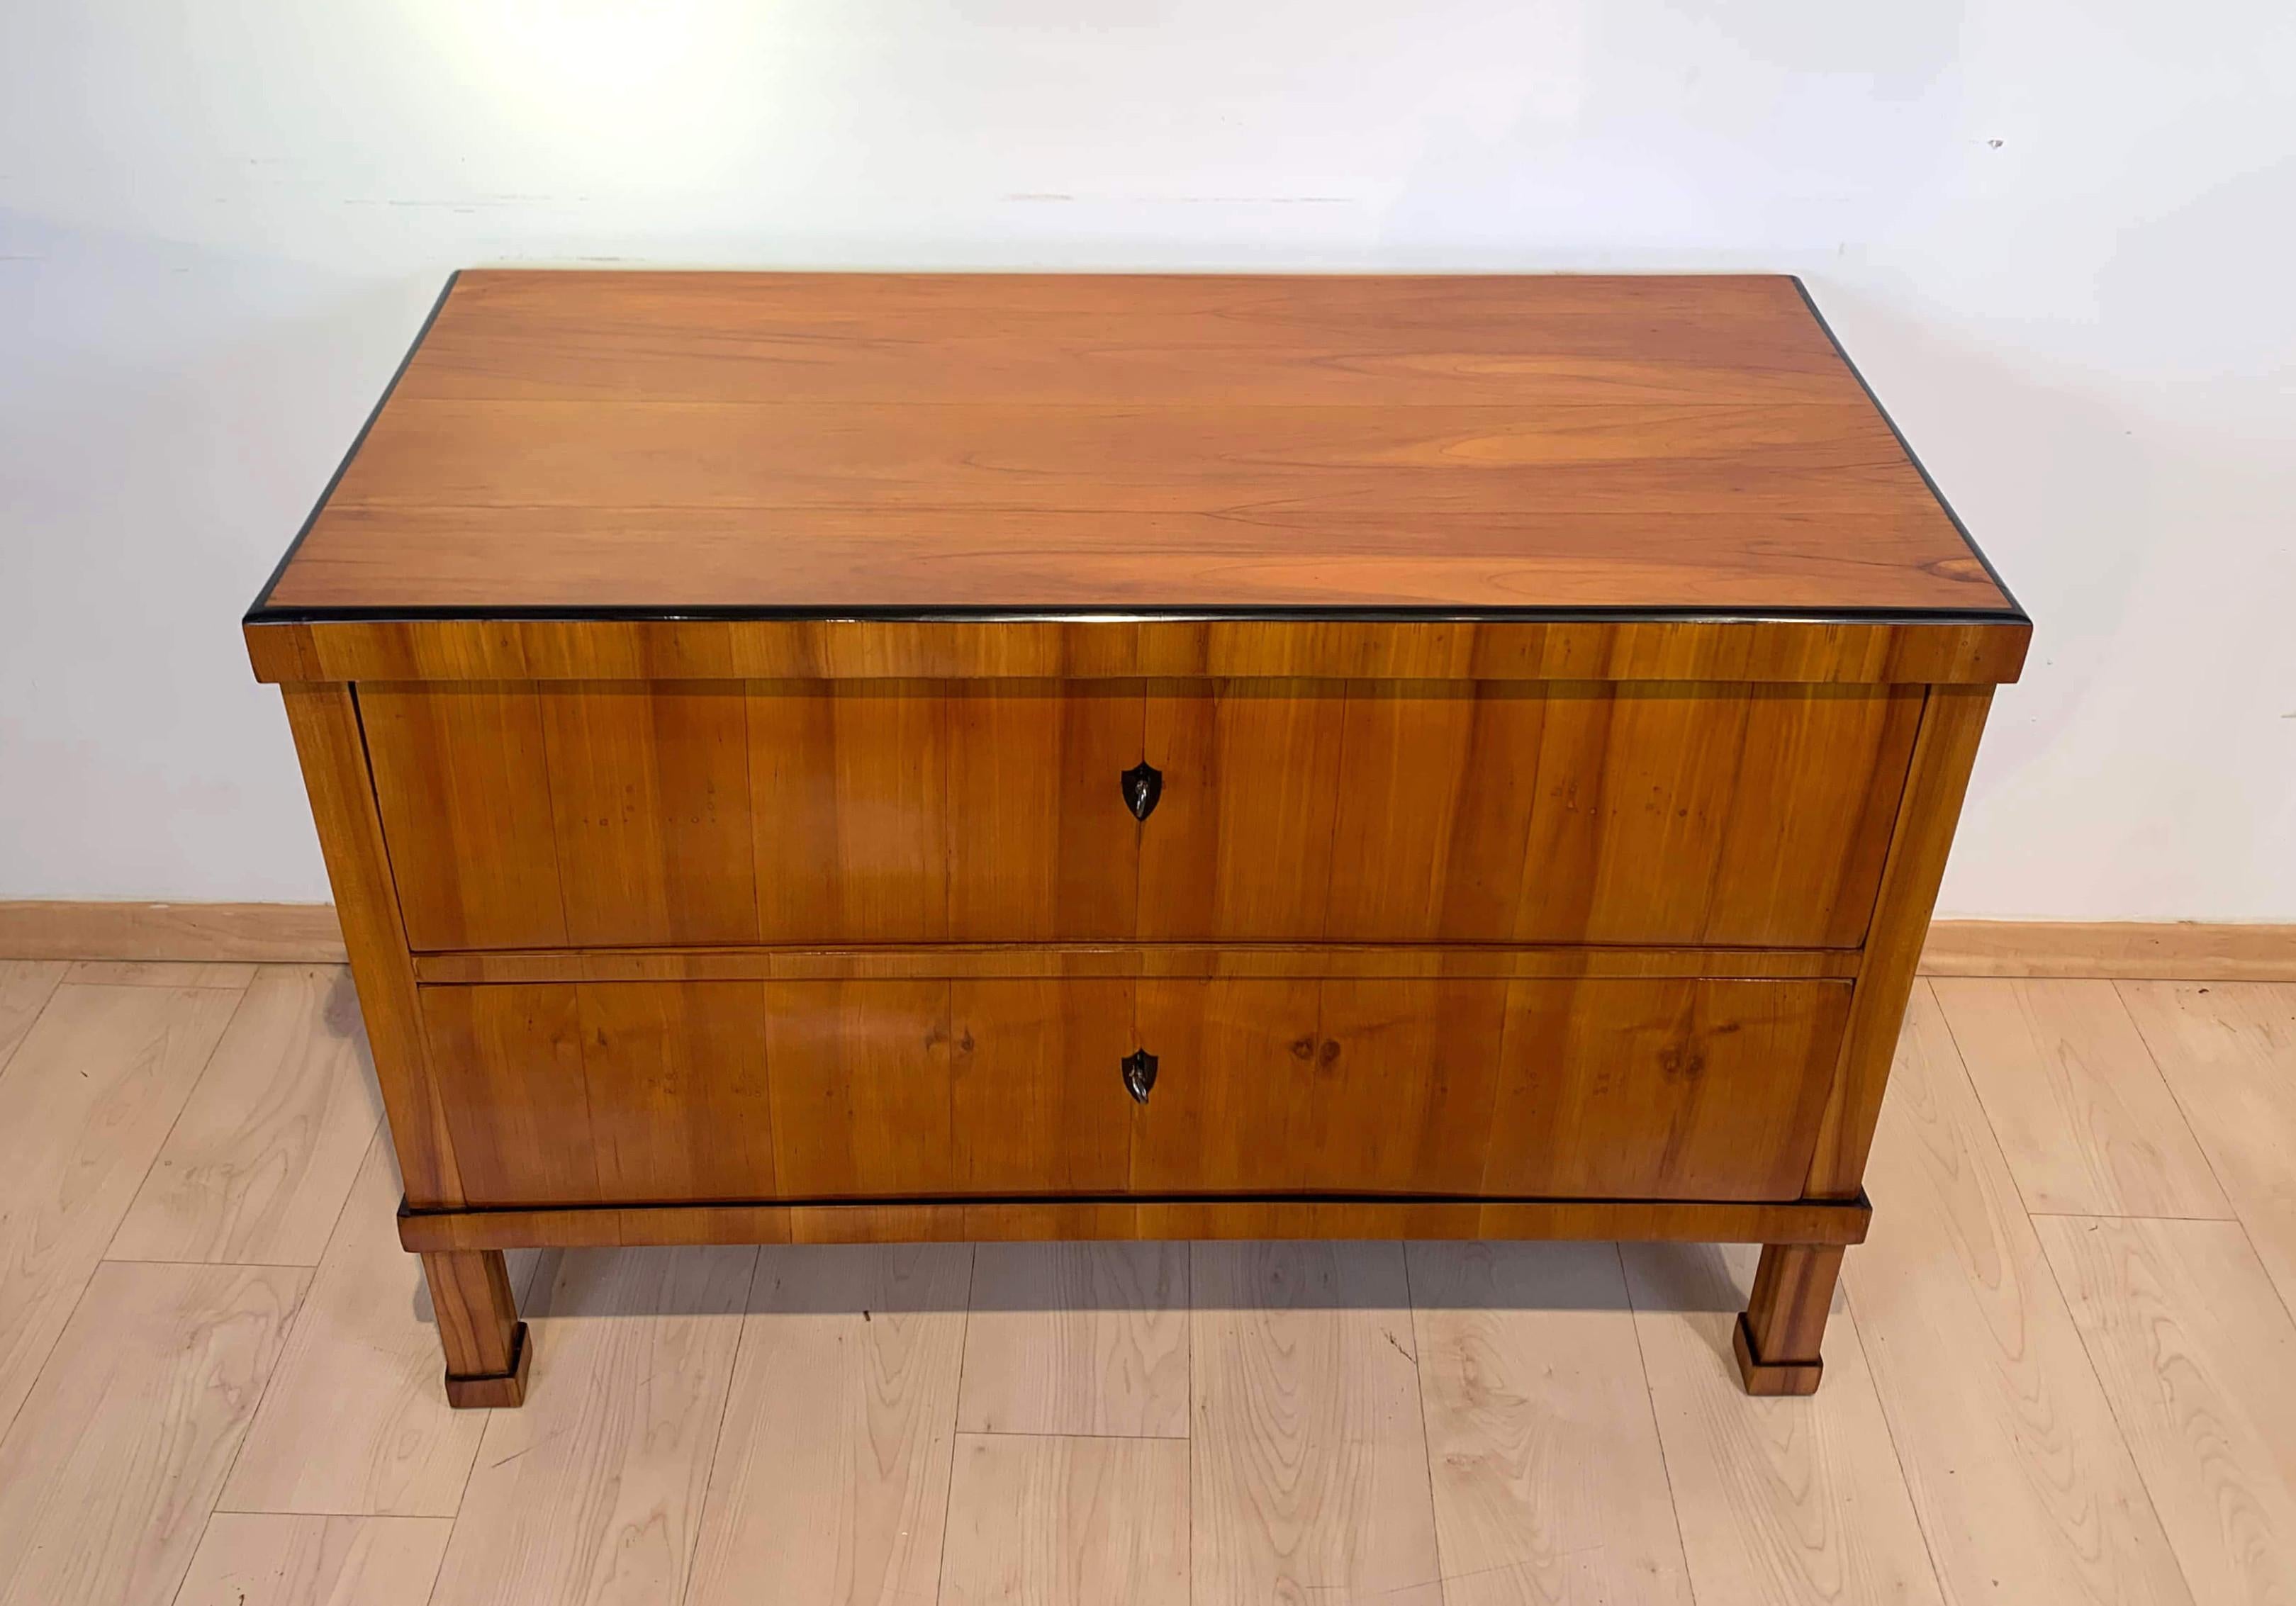 Straightlined neoclassical Biedermeier Commode / Chest of two drawers from Southern Germany, circa 1820-1830.

Wonderful bright yellow cherry veneer and solid wood. Massive 